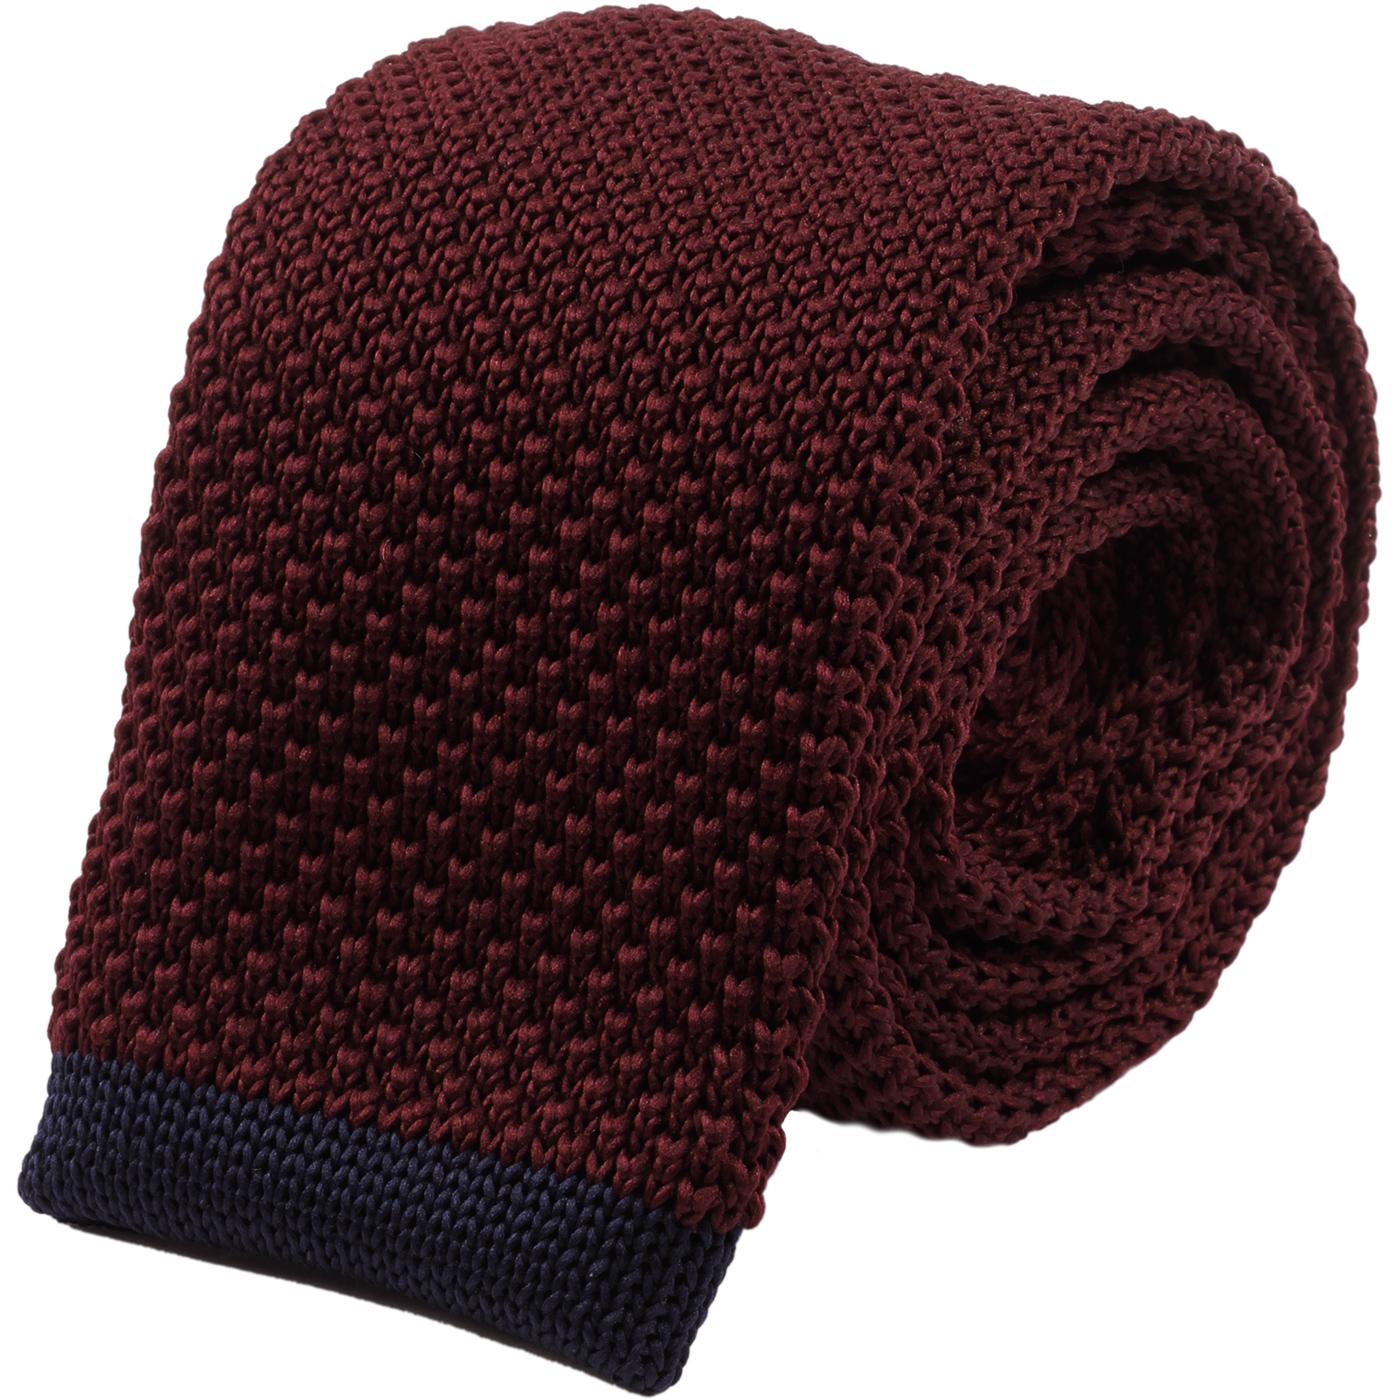 GIBSON LONDON Retro Mod Knit Square End Tie in Burgundy